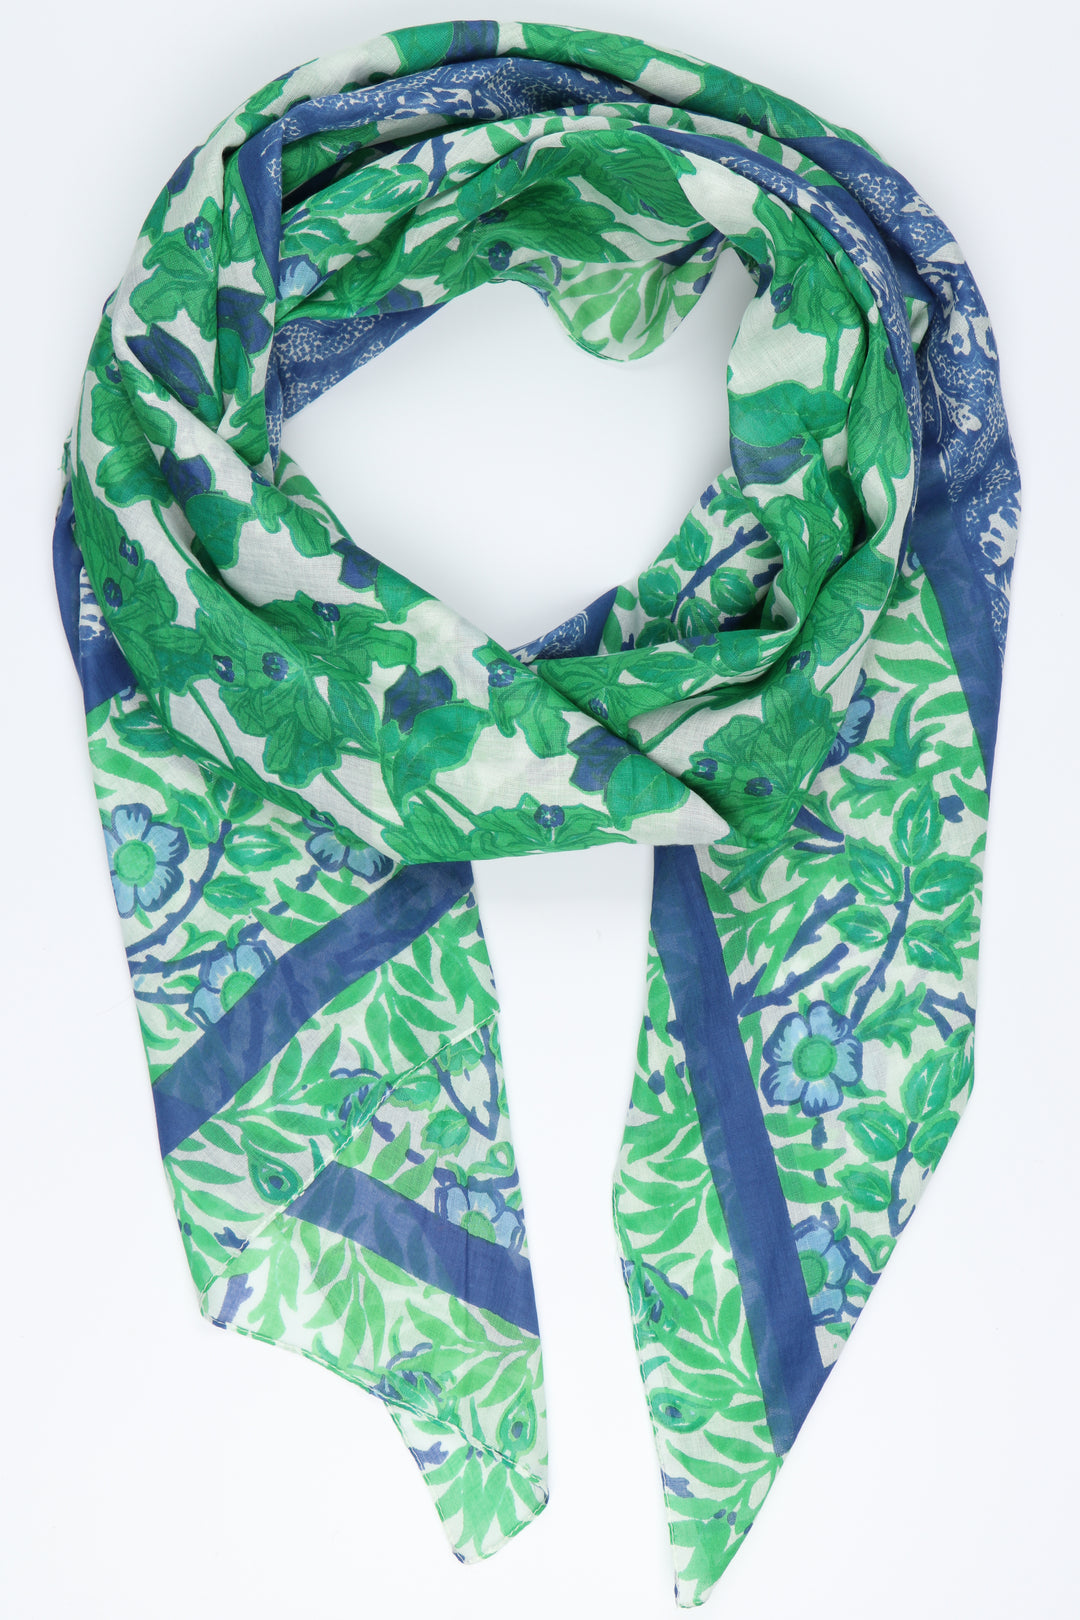 green and blue floral print scarf with blue border stripe